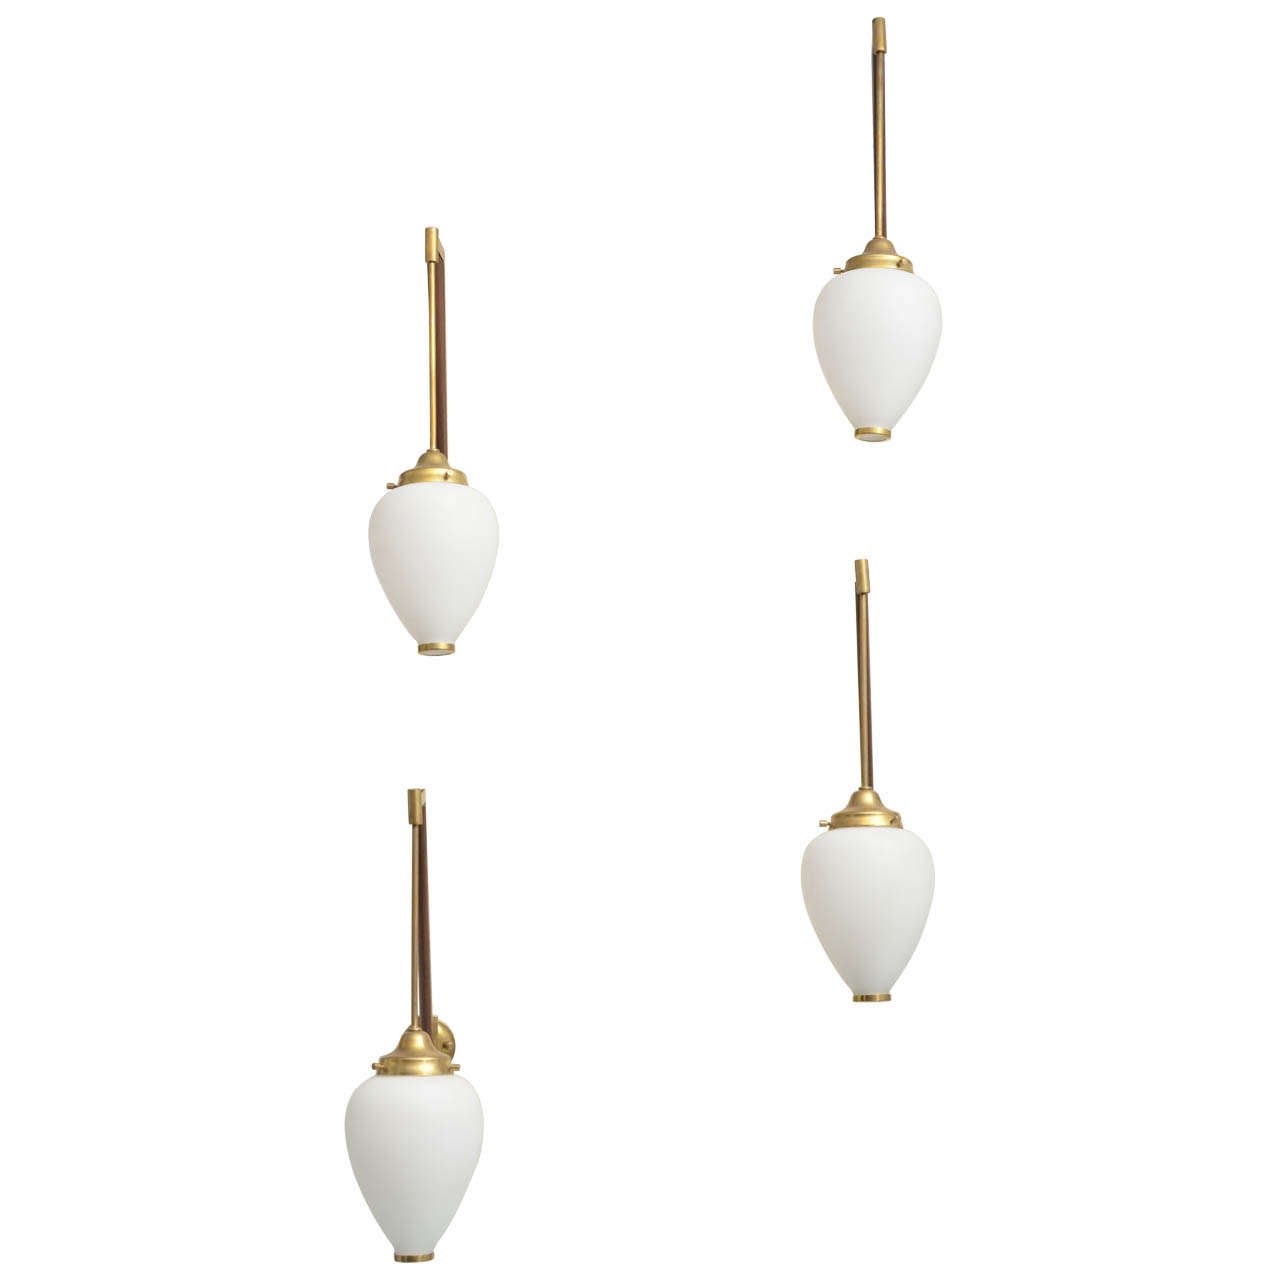 Pair of petite walnut and brass sconces with suspended frosted glass shade, 60 watts max.